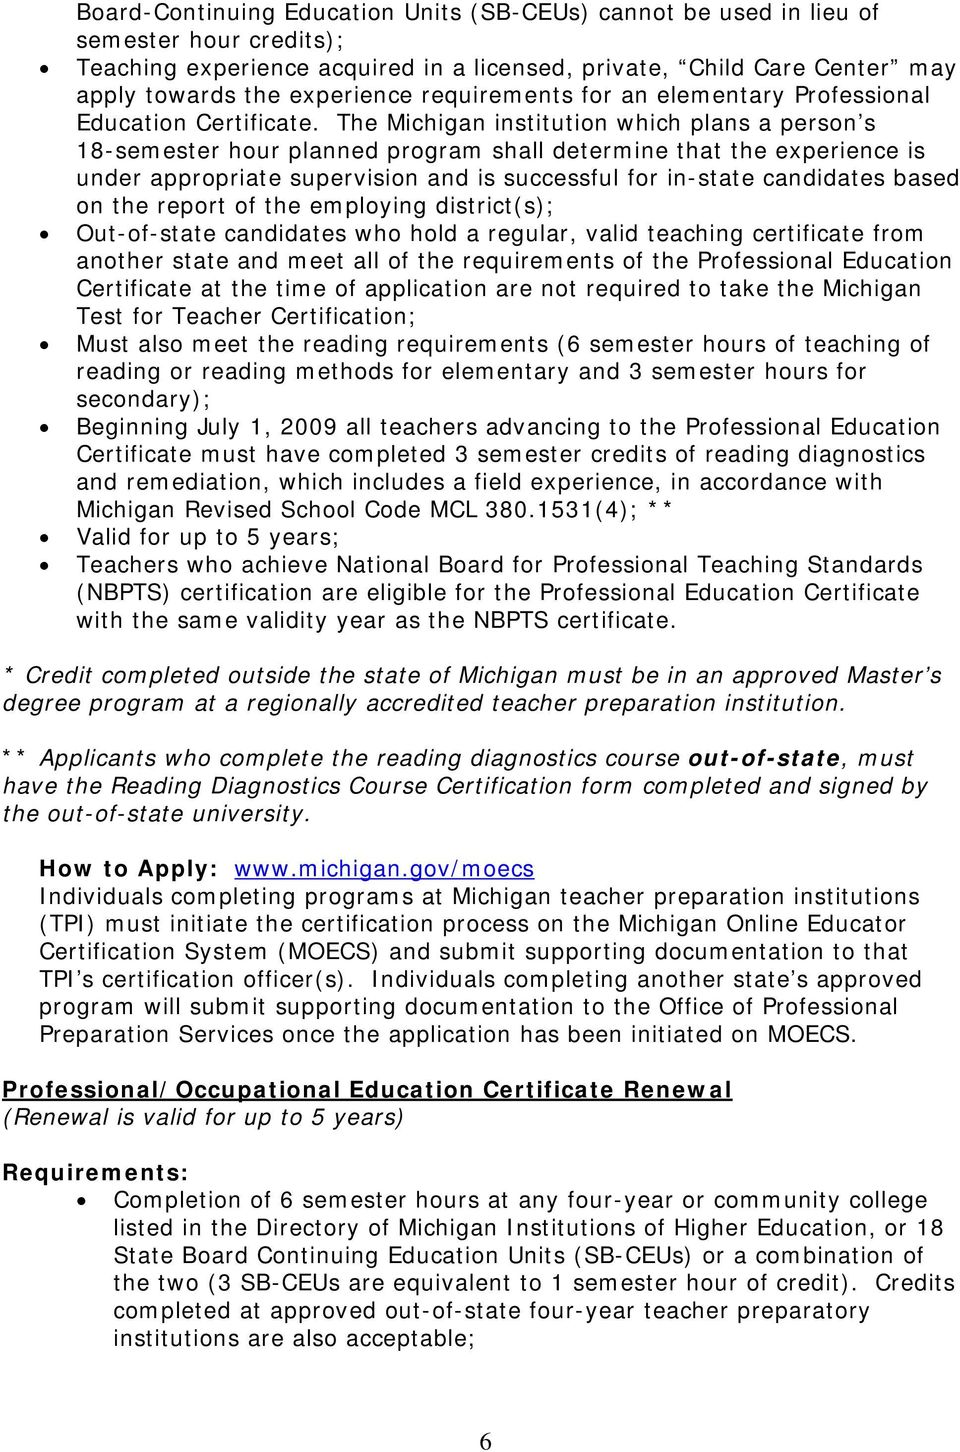 The Michigan institution which plans a person s 18-semester hour planned program shall determine that the experience is under appropriate supervision and is successful for in-state candidates based